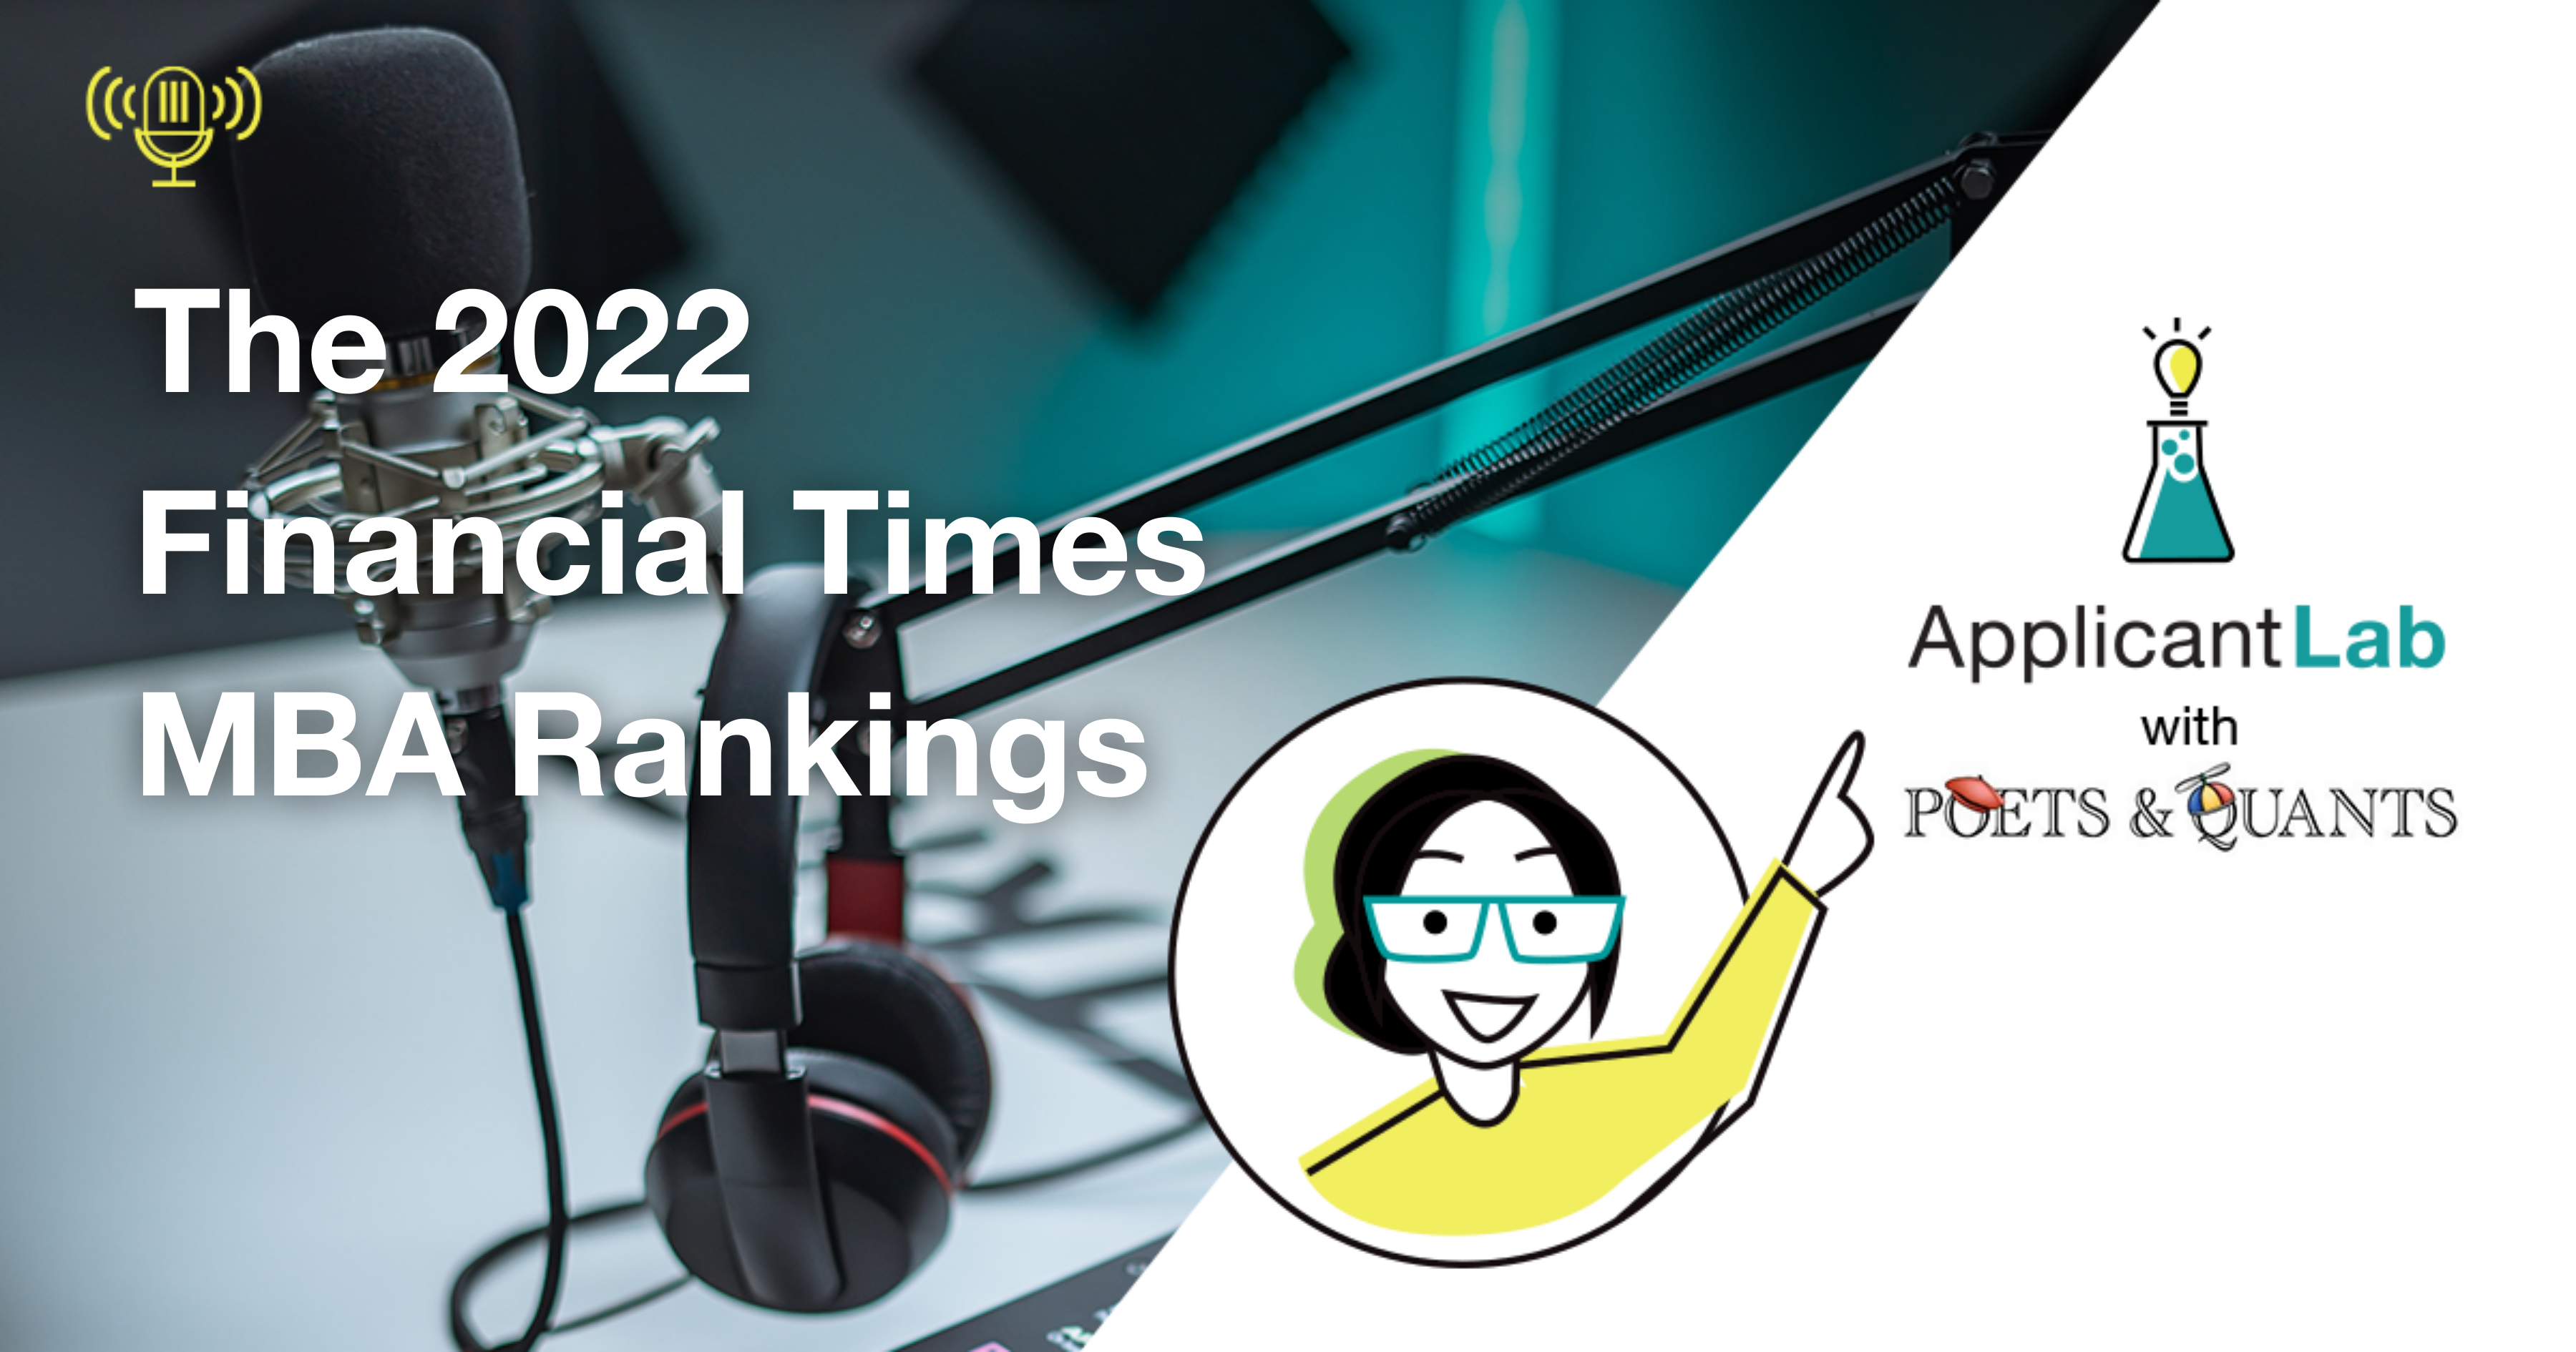 The 2022 Financial Times MBA Rankings